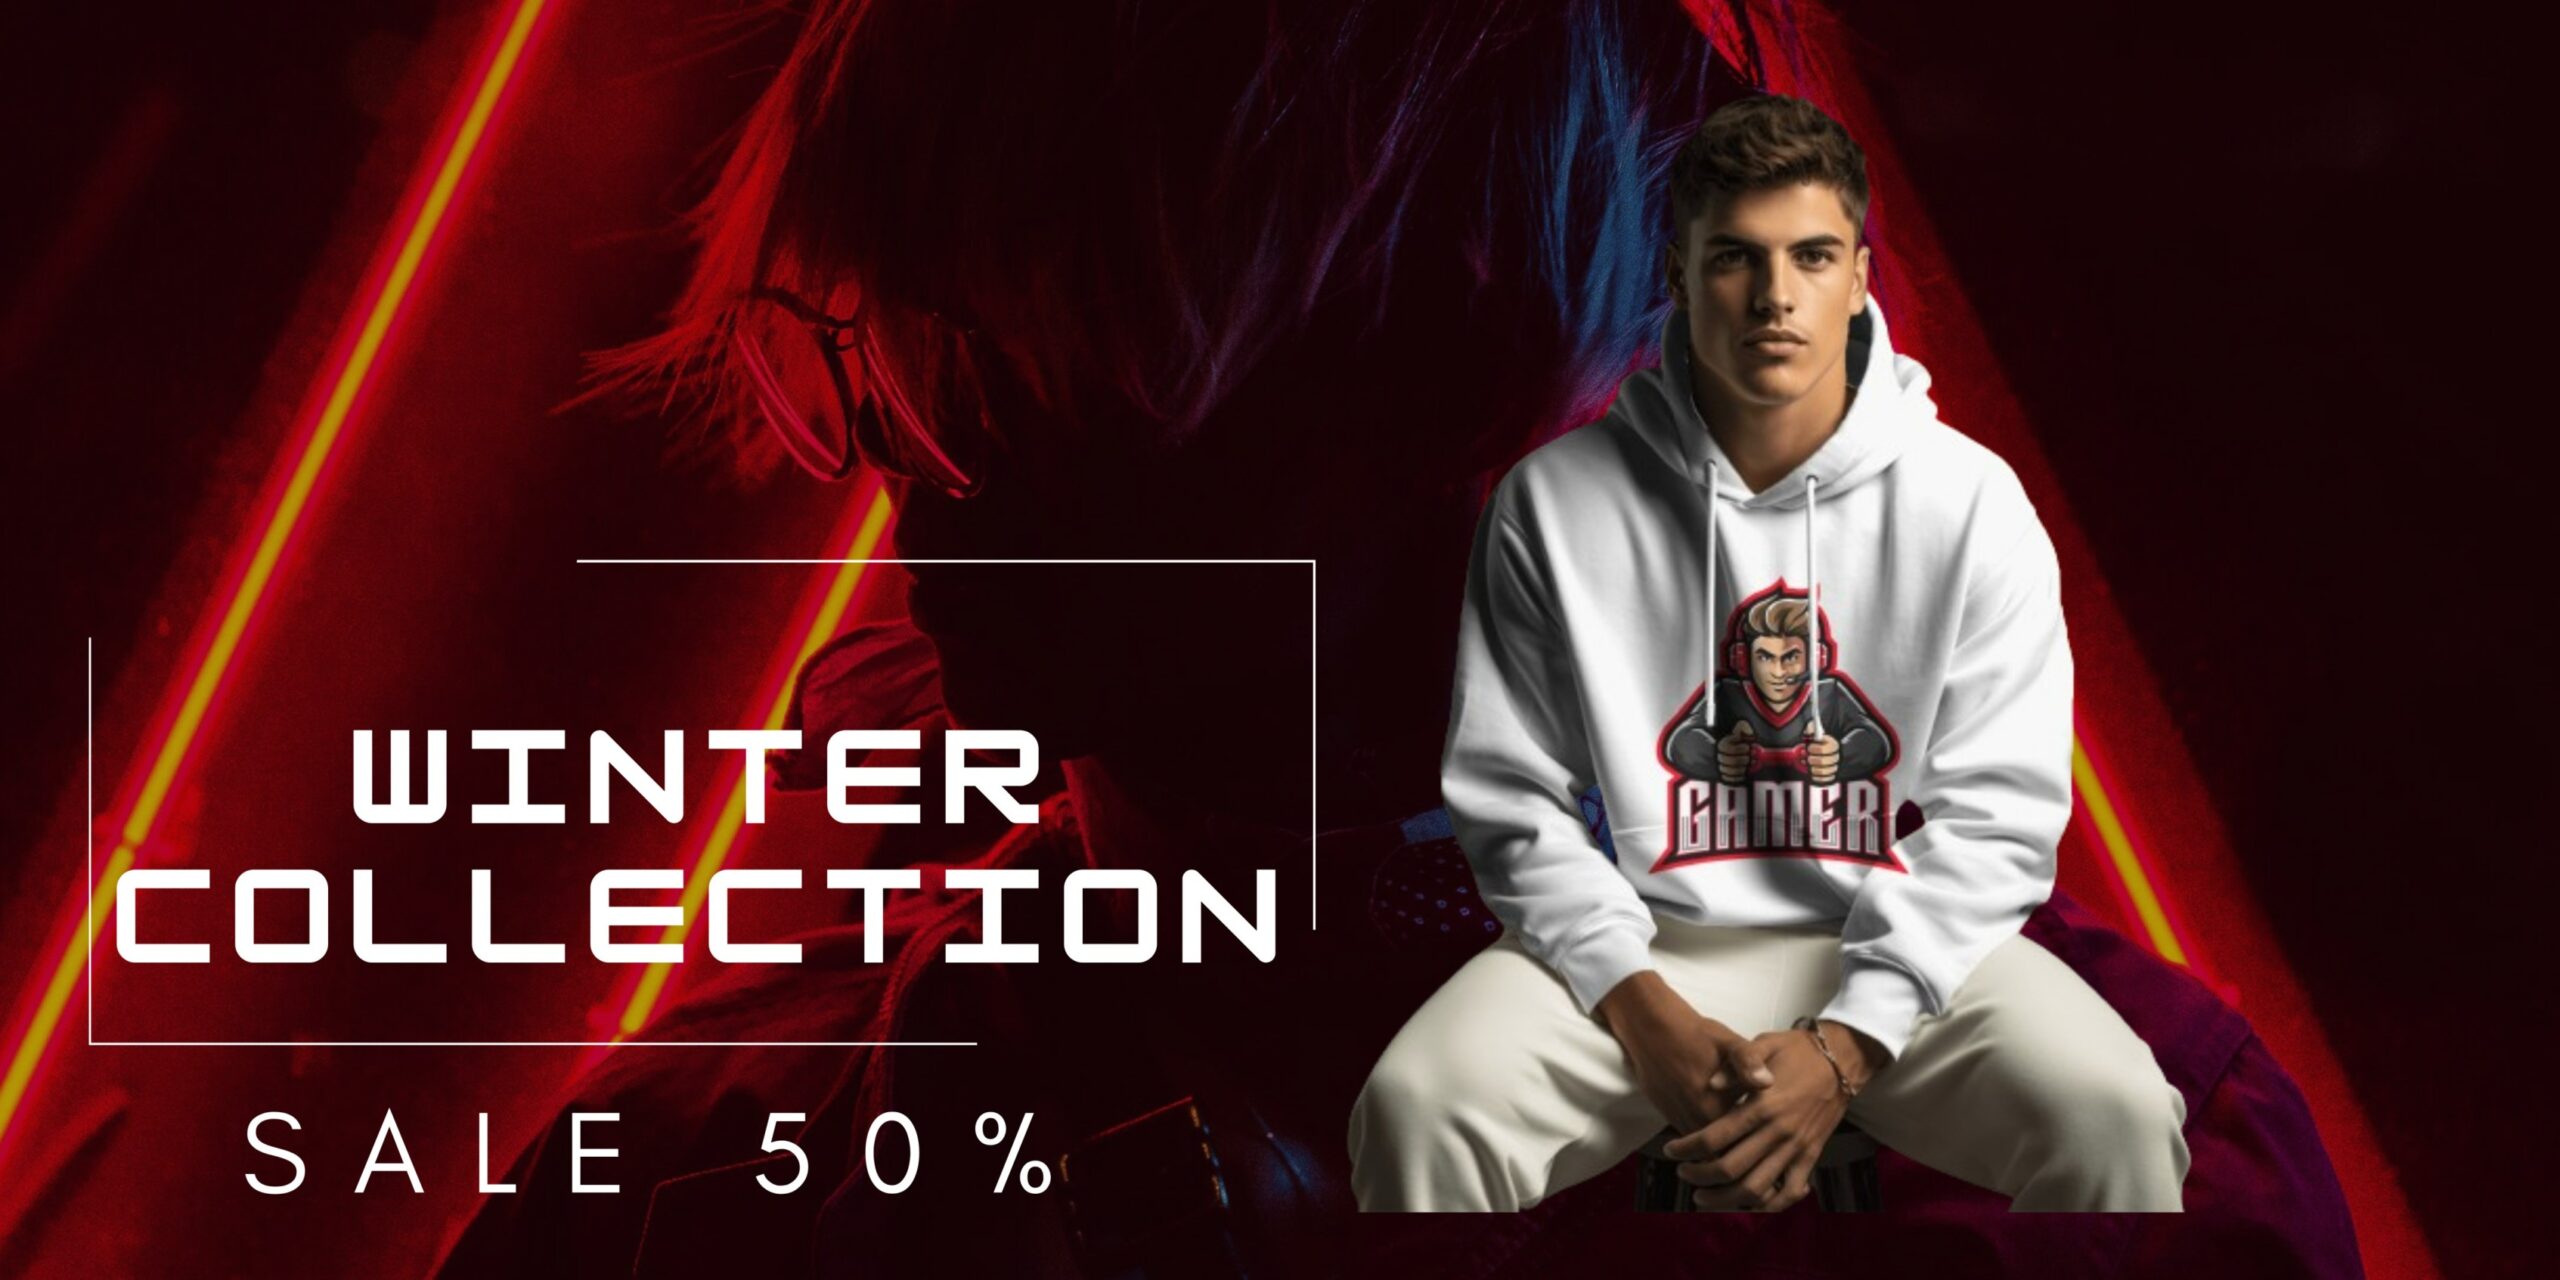 WINTER COLLECTION GET 50% OFF ON ALL GAMING HOODIES, SWEATSHIRTS AND SWEATERS. BUY FROM CLOTHSZILLA.COM